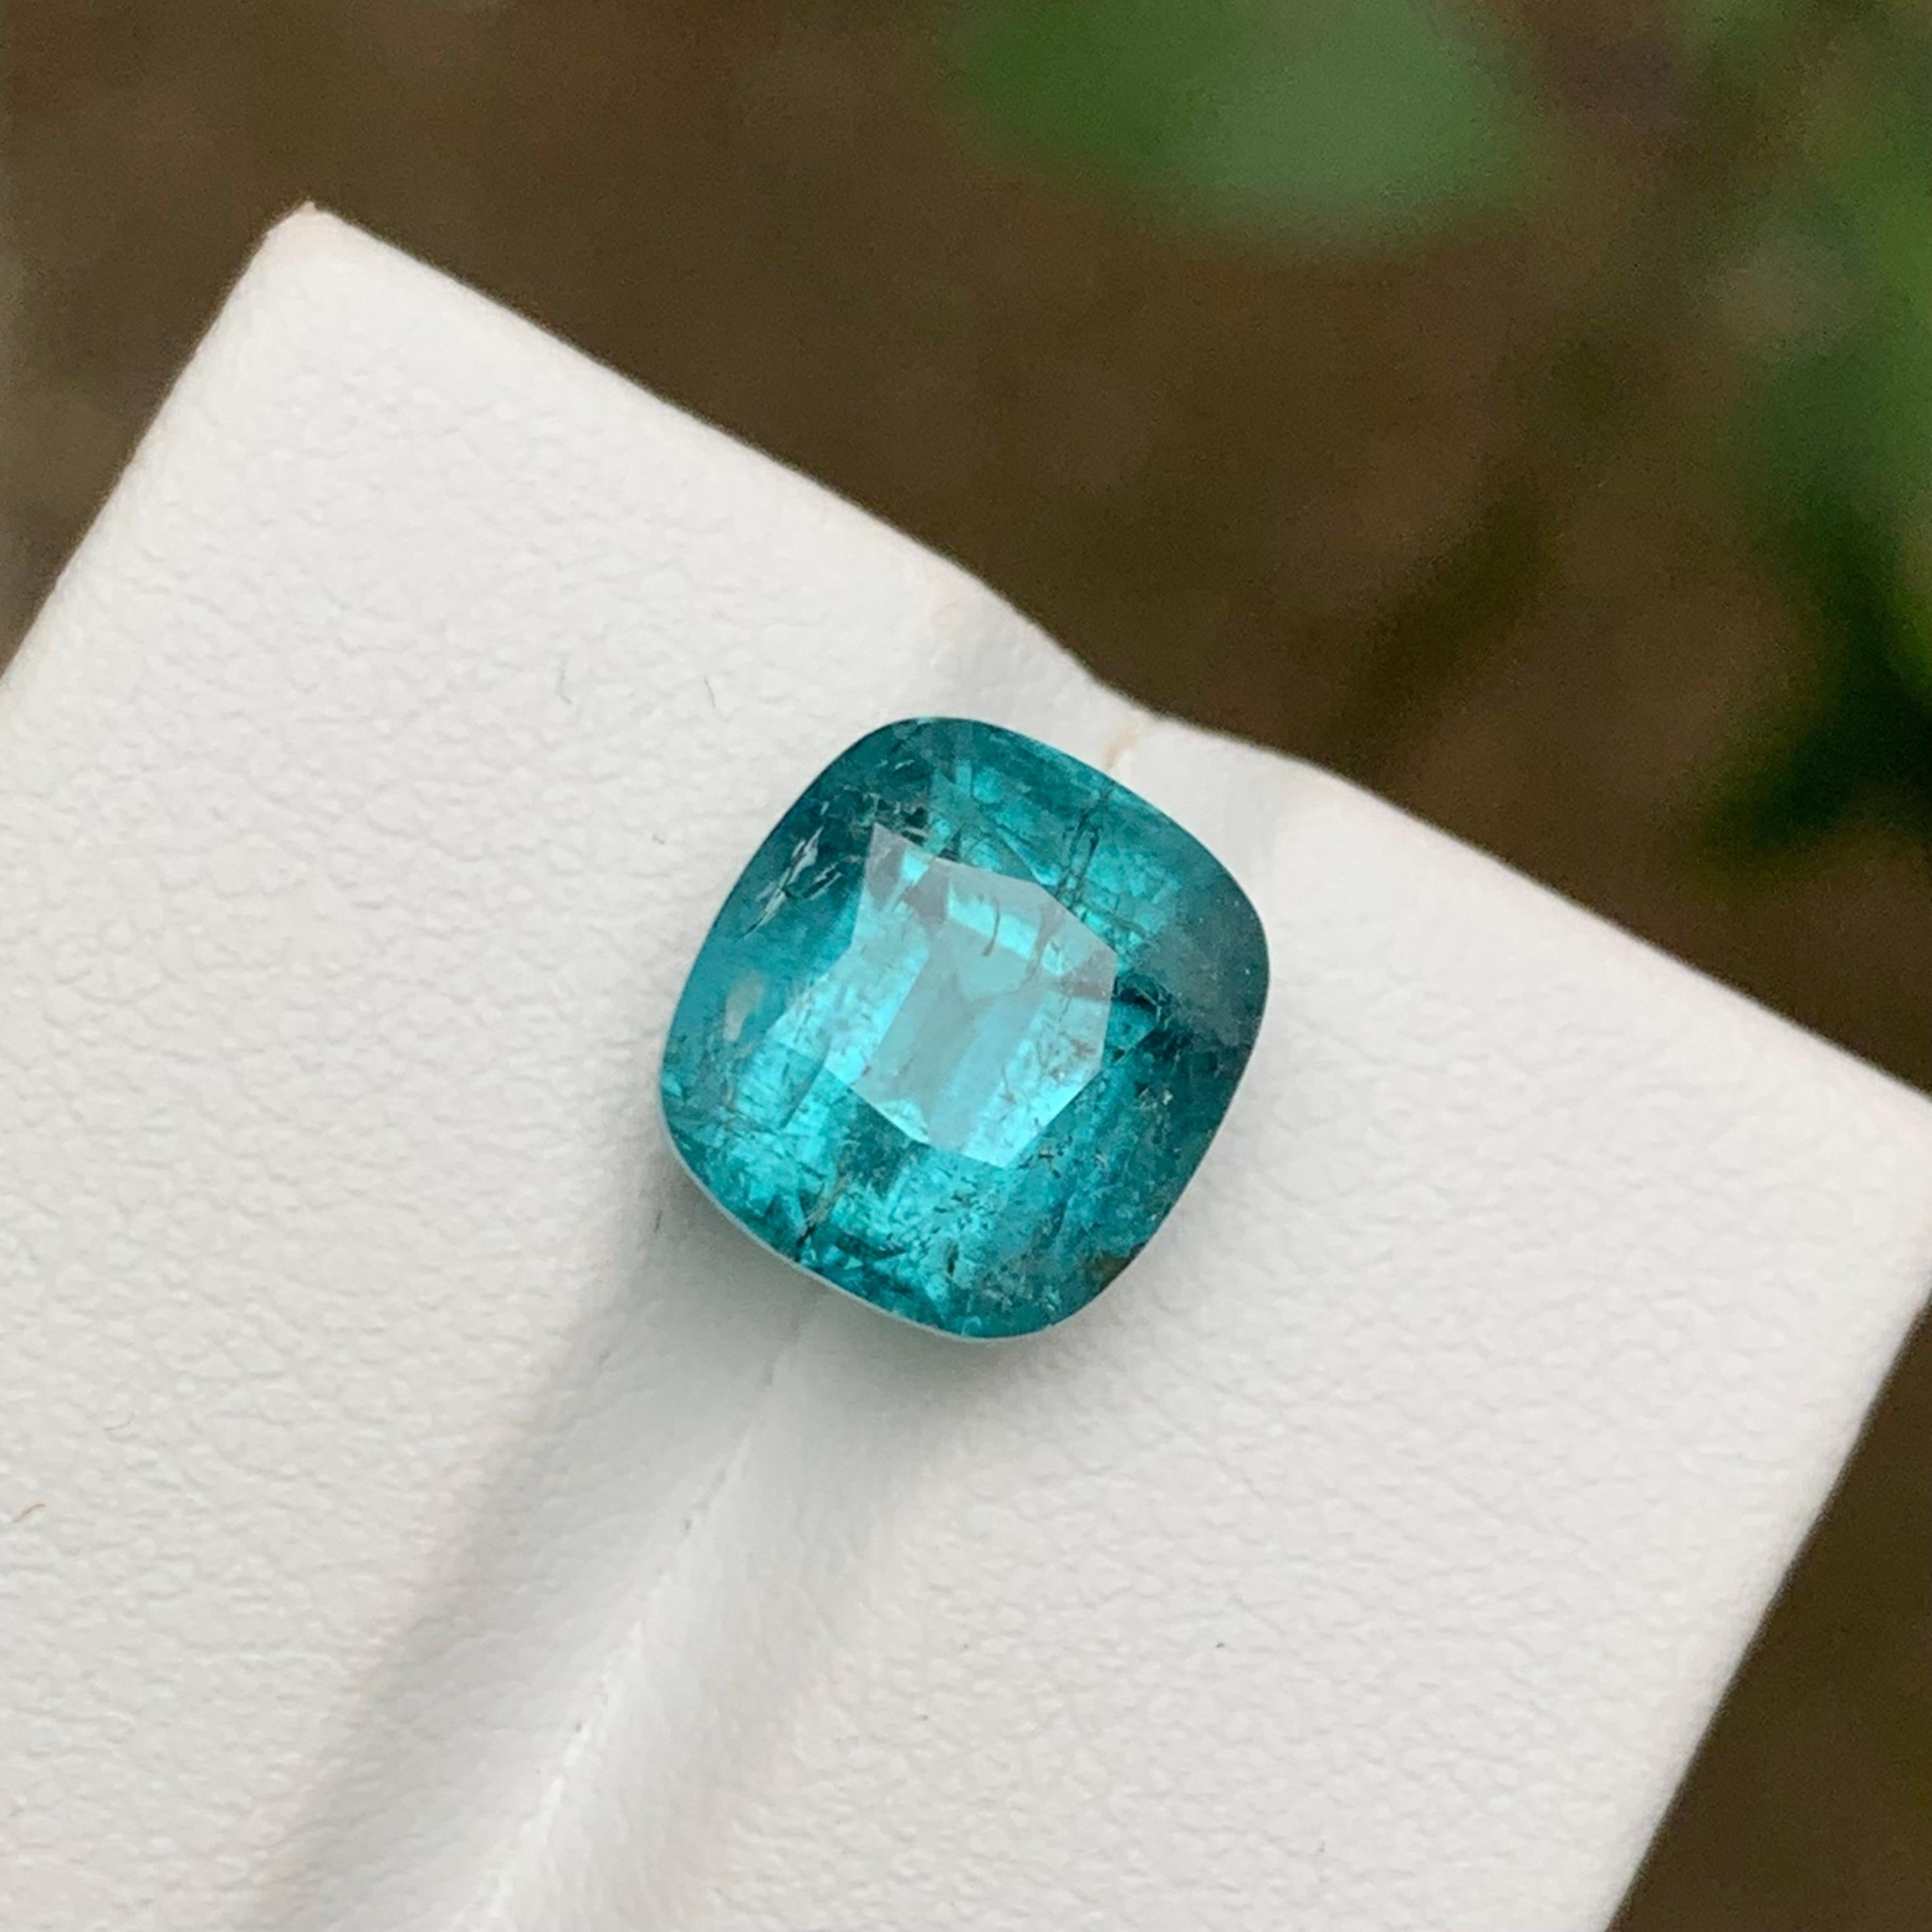 GEMSTONE TYPE: Tourmaline
PIECE(S): 1
WEIGHT: 6.25 Carats
SHAPE: Cushion Cut
SIZE (MM): 10.20 x 9.50 x 8.53
COLOR: Vibrant Blue
CLARITY: Moderately Included
TREATMENT: None
ORIGIN: Afghanistan
CERTIFICATE: On demand
(if you require a certificate,